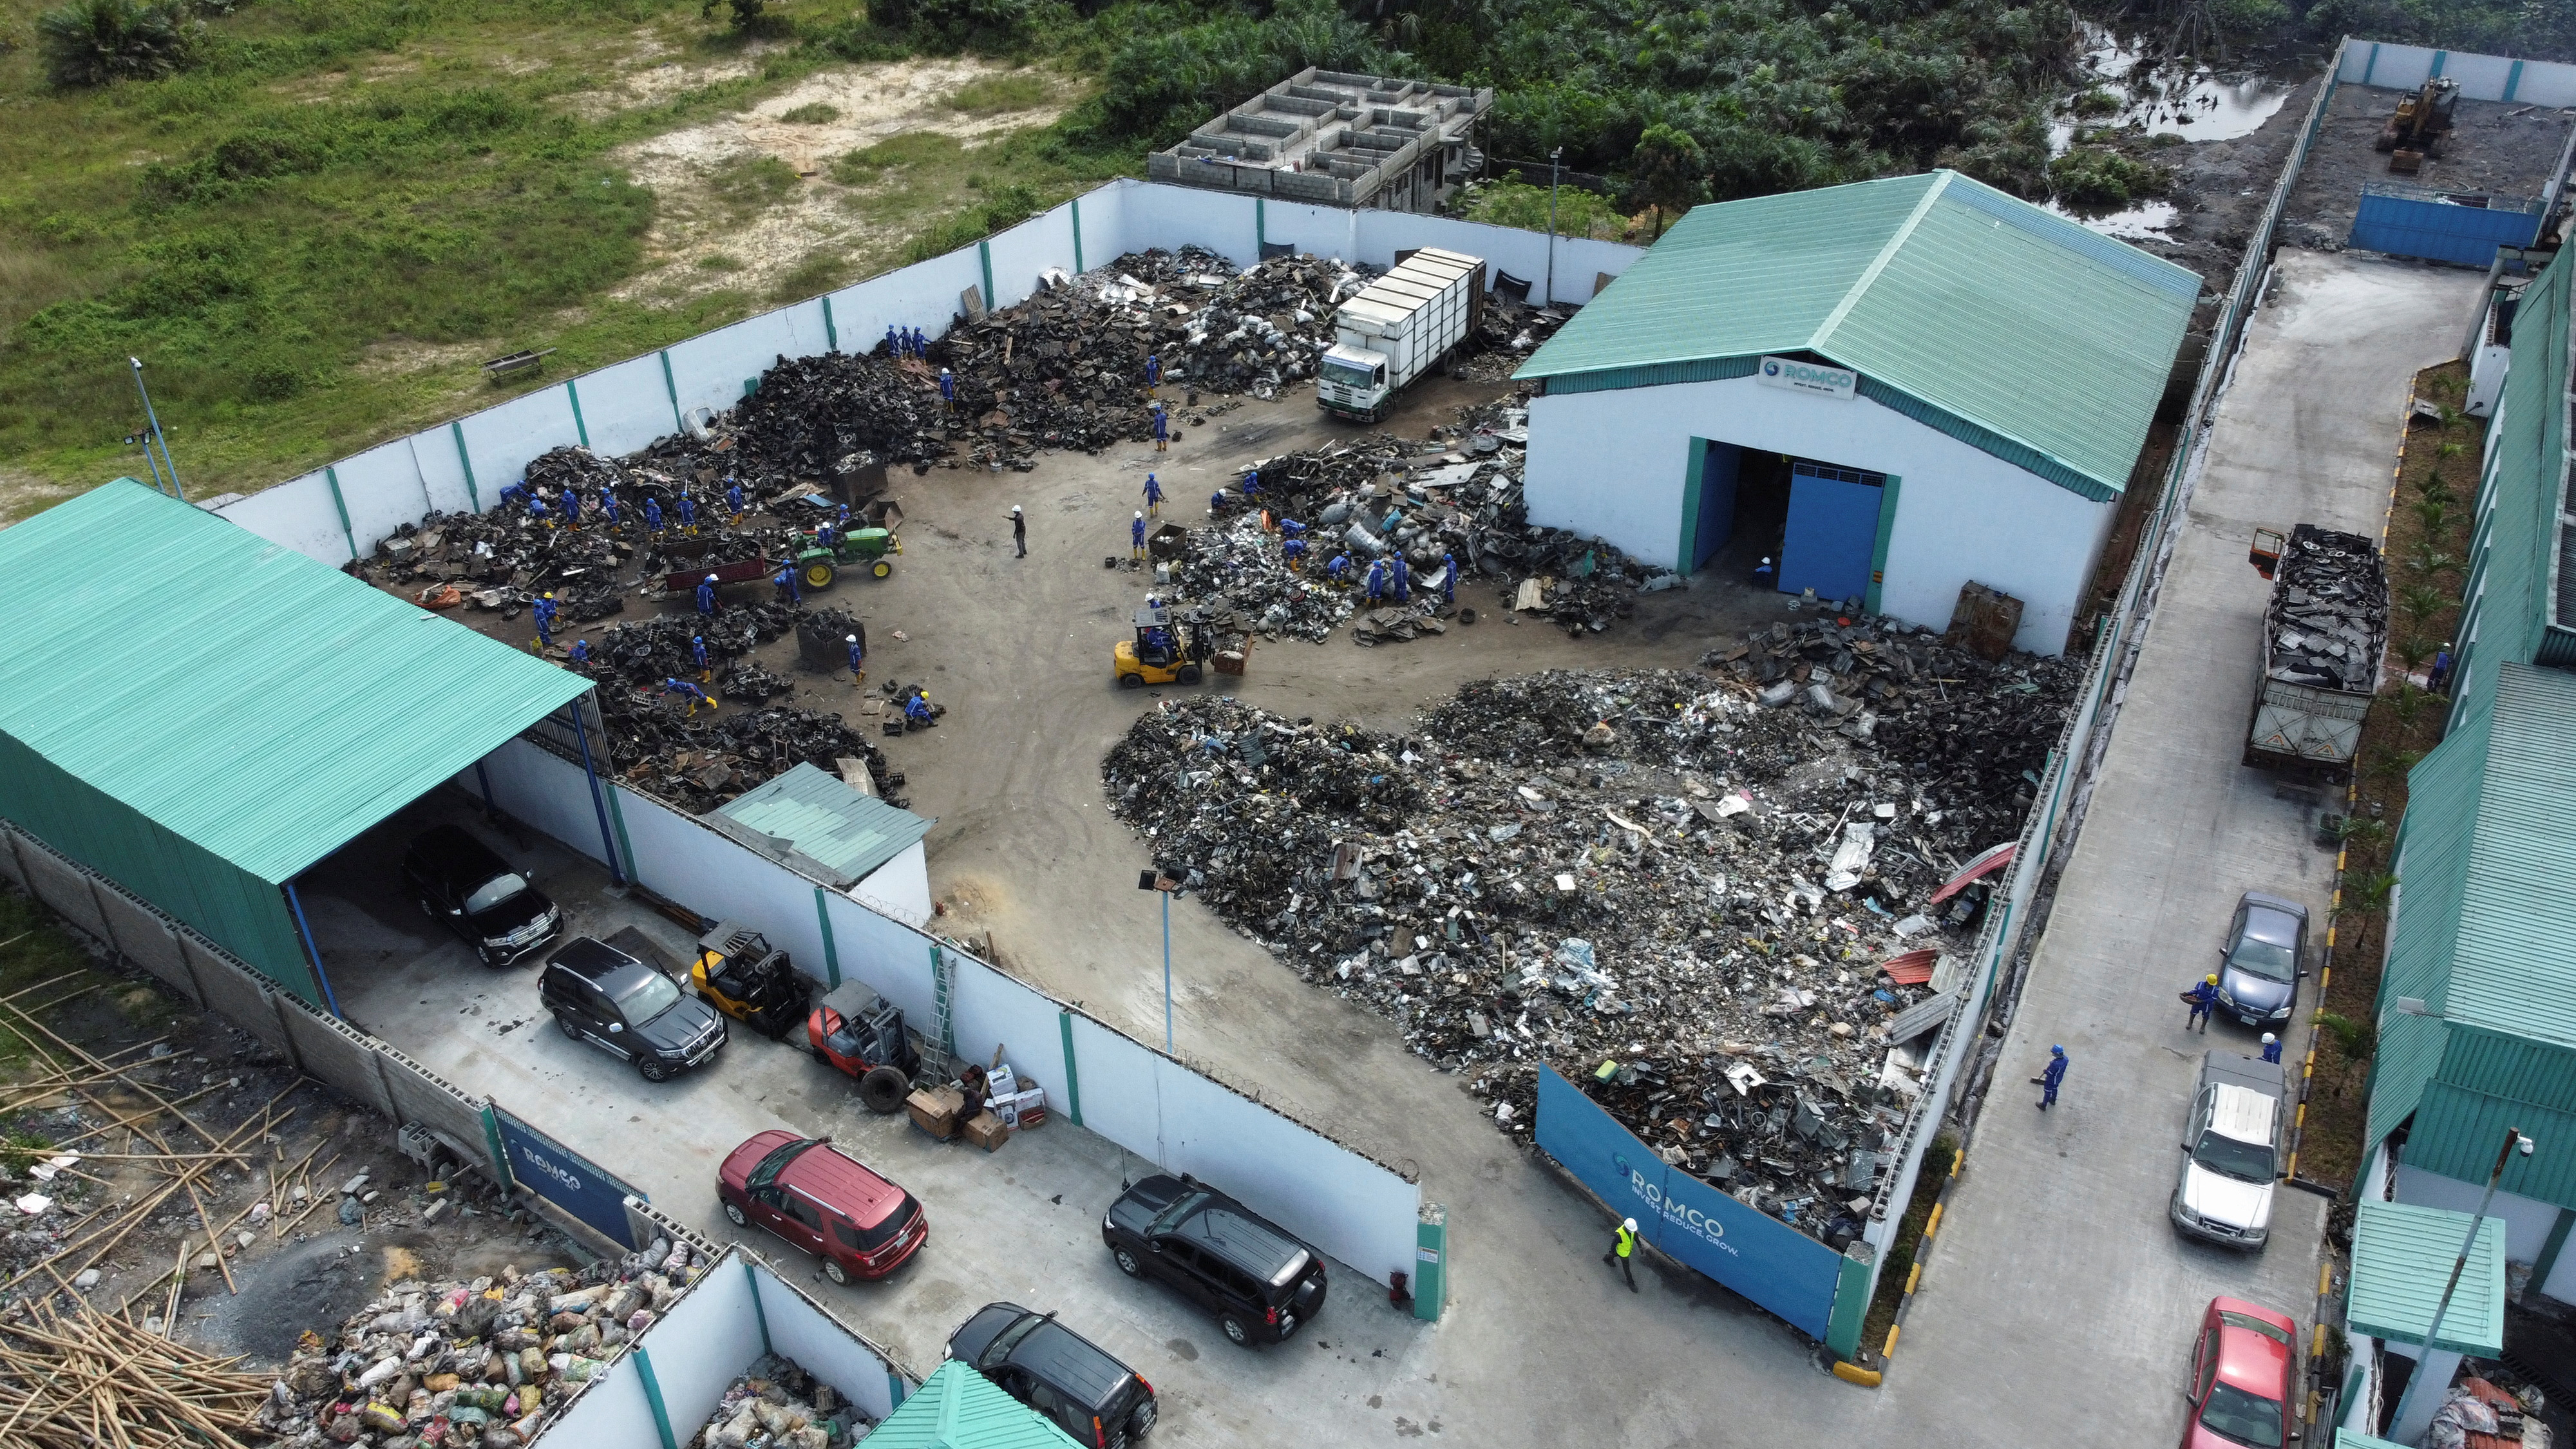 An aerial view shows workers sorting pieces of an aluminium engine at a Romco Recycling facility in Lagos